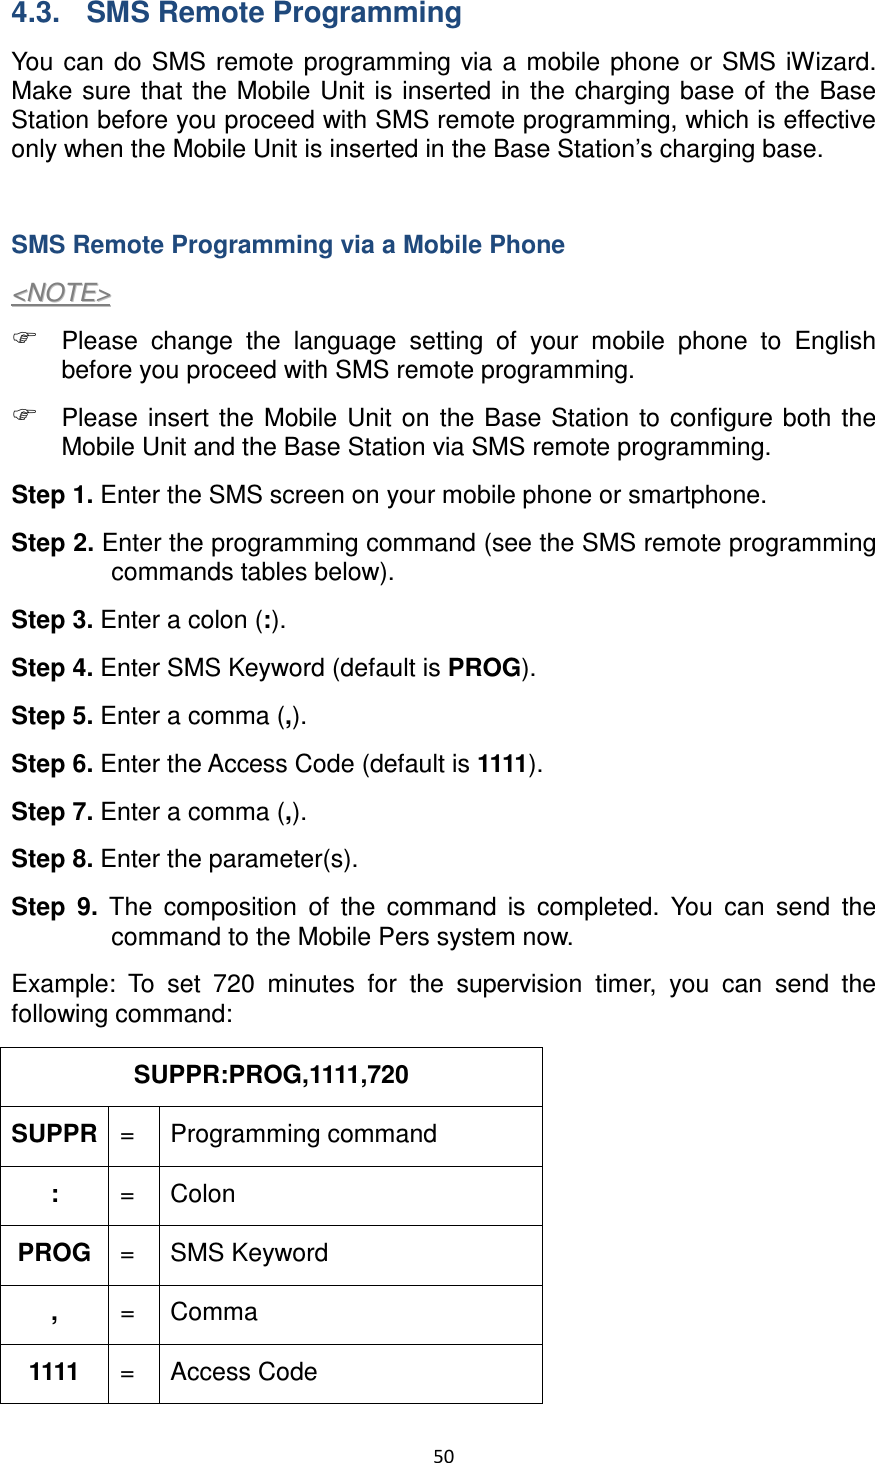 50  4.3.  SMS Remote Programming You  can do SMS  remote  programming  via  a  mobile phone or  SMS  iWizard. Make sure that the Mobile Unit is  inserted in the charging base of the Base Station before you proceed with SMS remote programming, which is effective only when the Mobile Unit is inserted in the Base Station’s charging base.    SMS Remote Programming via a Mobile Phone &lt;&lt;NNOOTTEE&gt;&gt;   Please  change  the  language  setting  of  your  mobile  phone  to  English before you proceed with SMS remote programming.    Please  insert  the  Mobile Unit  on  the  Base  Station  to  configure  both  the Mobile Unit and the Base Station via SMS remote programming.   Step 1. Enter the SMS screen on your mobile phone or smartphone. Step 2. Enter the programming command (see the SMS remote programming commands tables below). Step 3. Enter a colon (:). Step 4. Enter SMS Keyword (default is PROG). Step 5. Enter a comma (,). Step 6. Enter the Access Code (default is 1111). Step 7. Enter a comma (,). Step 8. Enter the parameter(s).   Step  9.  The  composition  of  the  command  is  completed.  You  can  send  the command to the Mobile Pers system now.   Example:  To  set  720  minutes  for  the  supervision  timer,  you  can  send  the following command: SUPPR:PROG,1111,720                   SUPPR =   Programming command :  =  Colon PROG =  SMS Keyword ,  =  Comma 1111  =  Access Code 